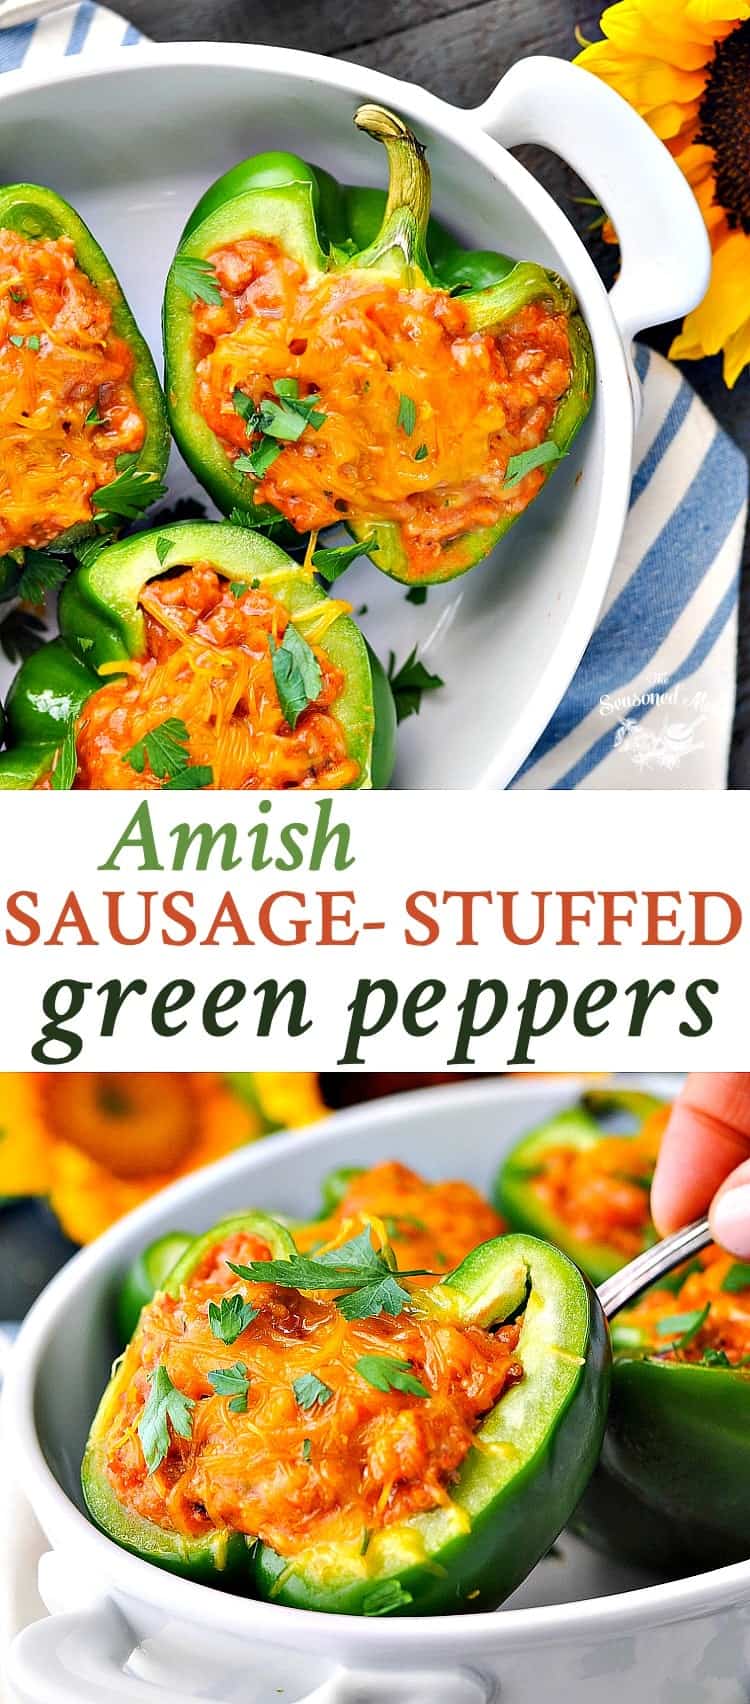 Amish Sausage Stuffed Green Peppers - The Seasoned Mom